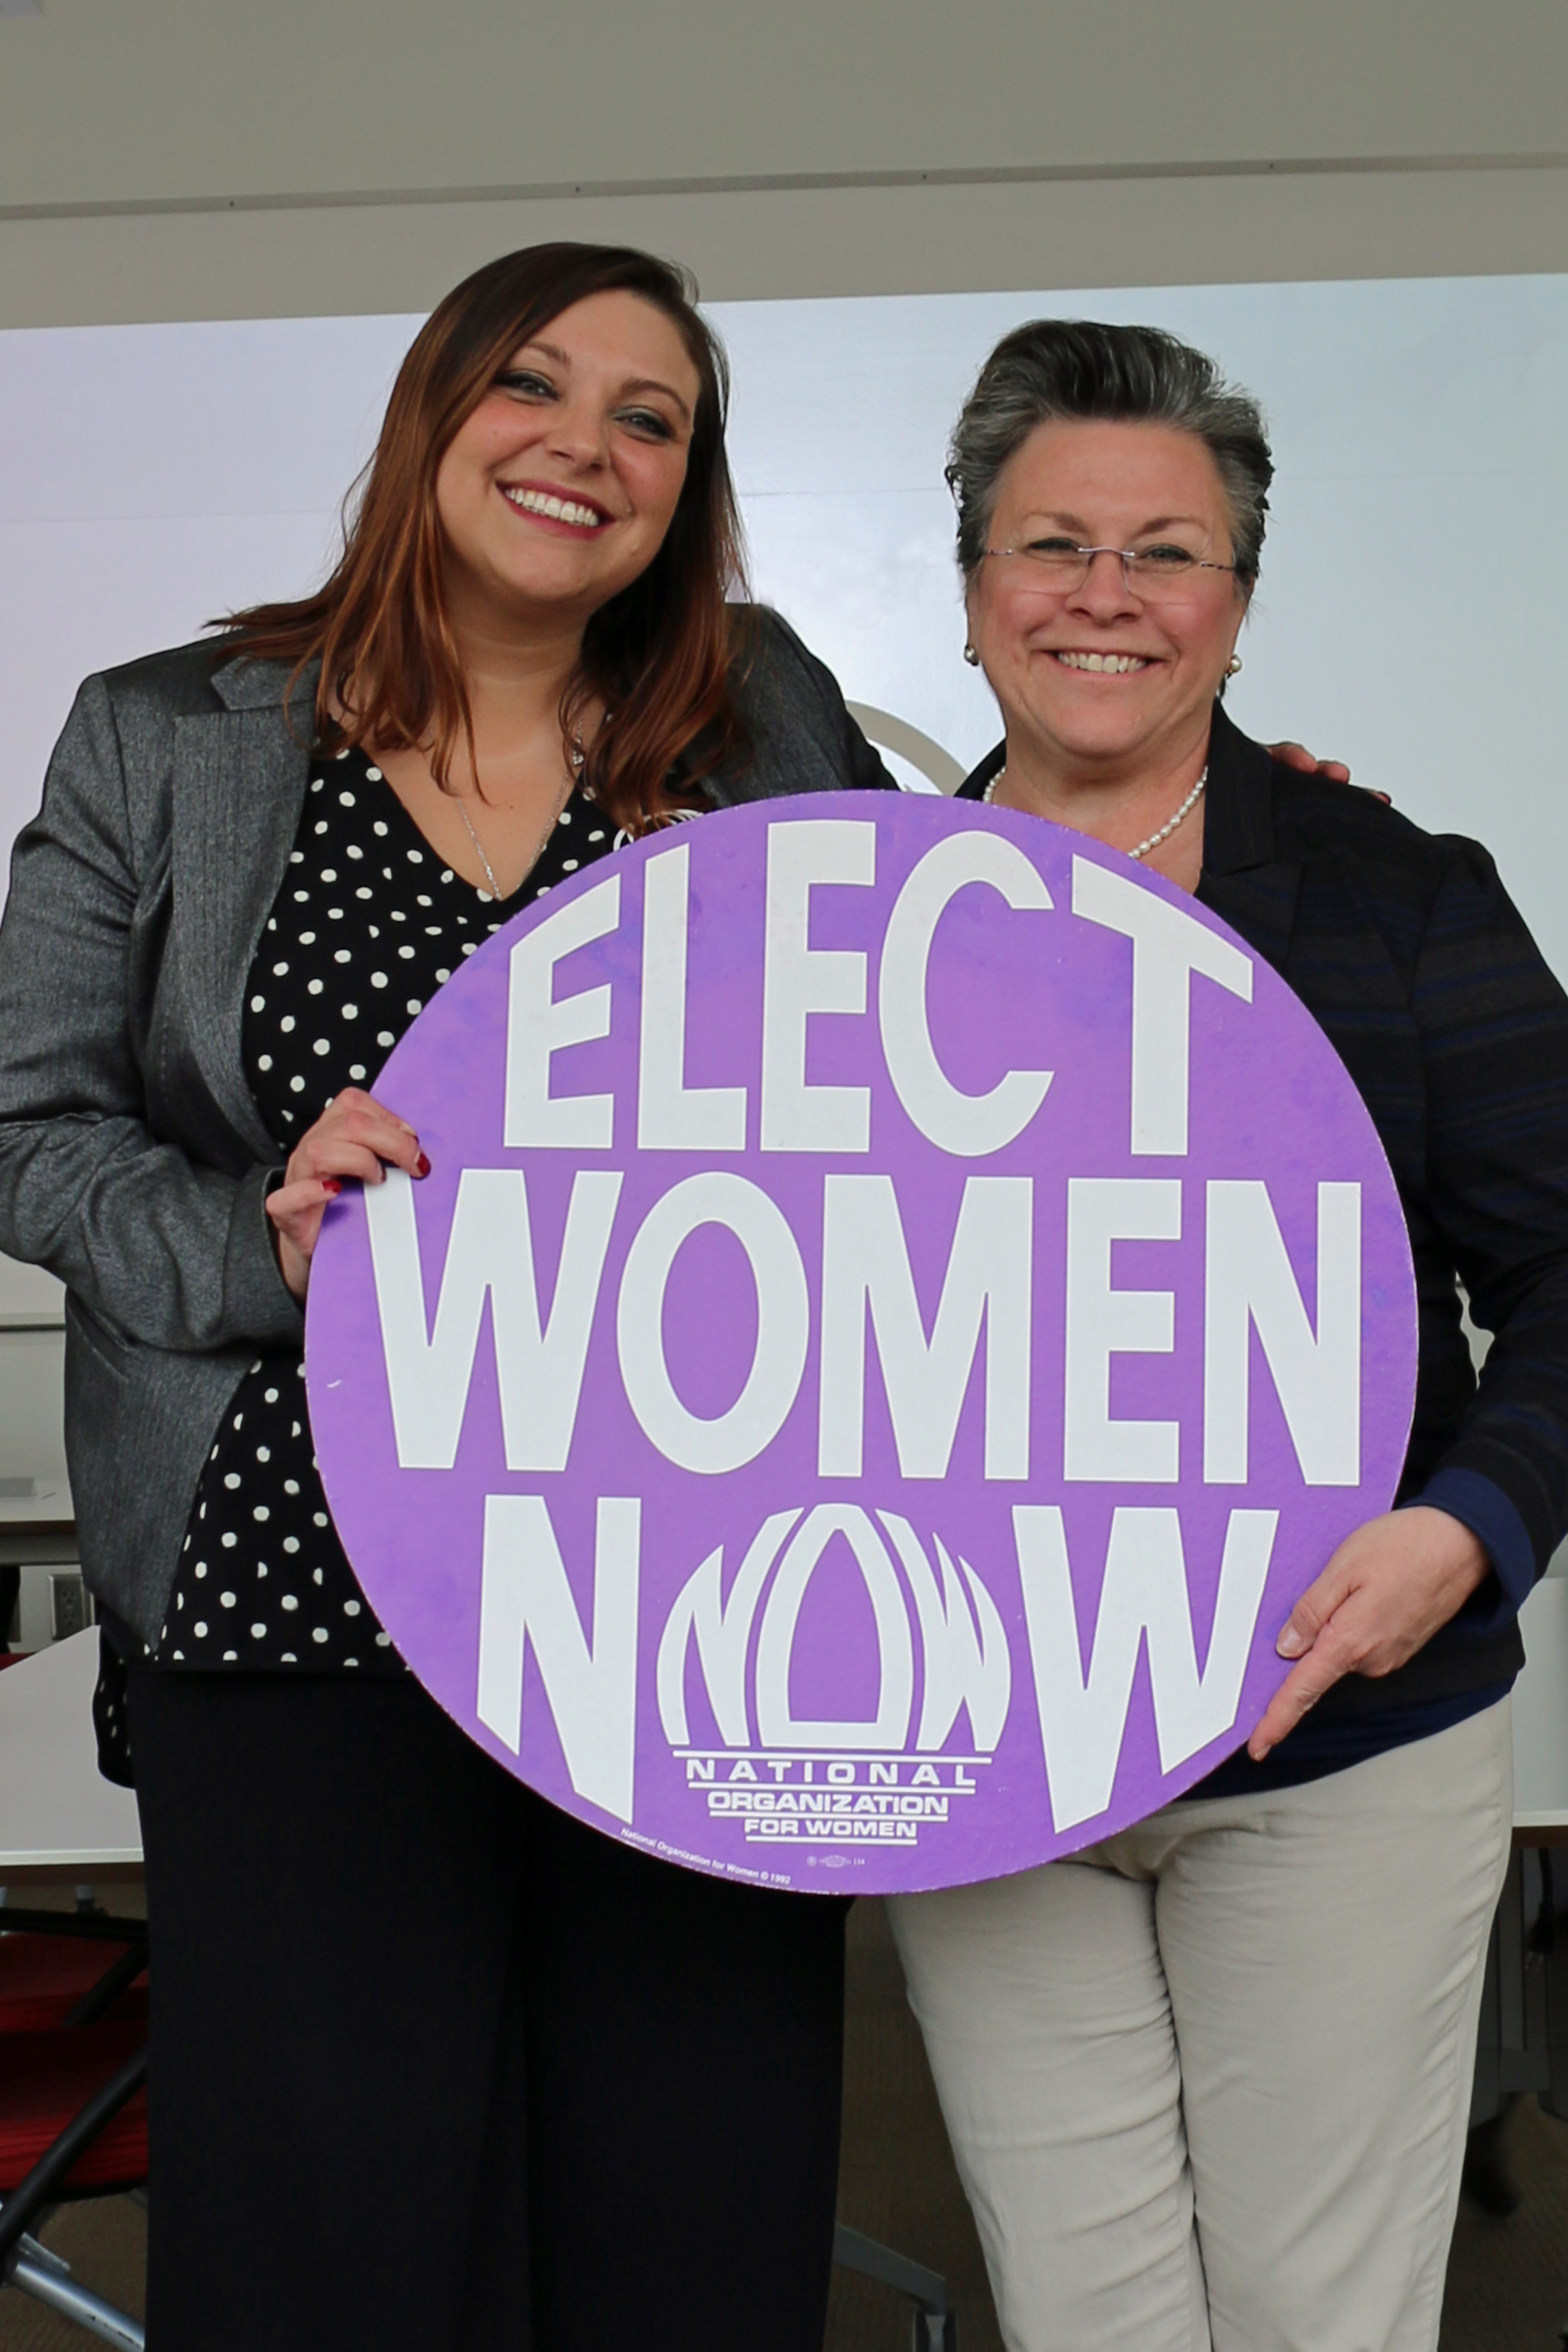 Wisconsin NOW president Lindsay Lemmer with Cathy Myers